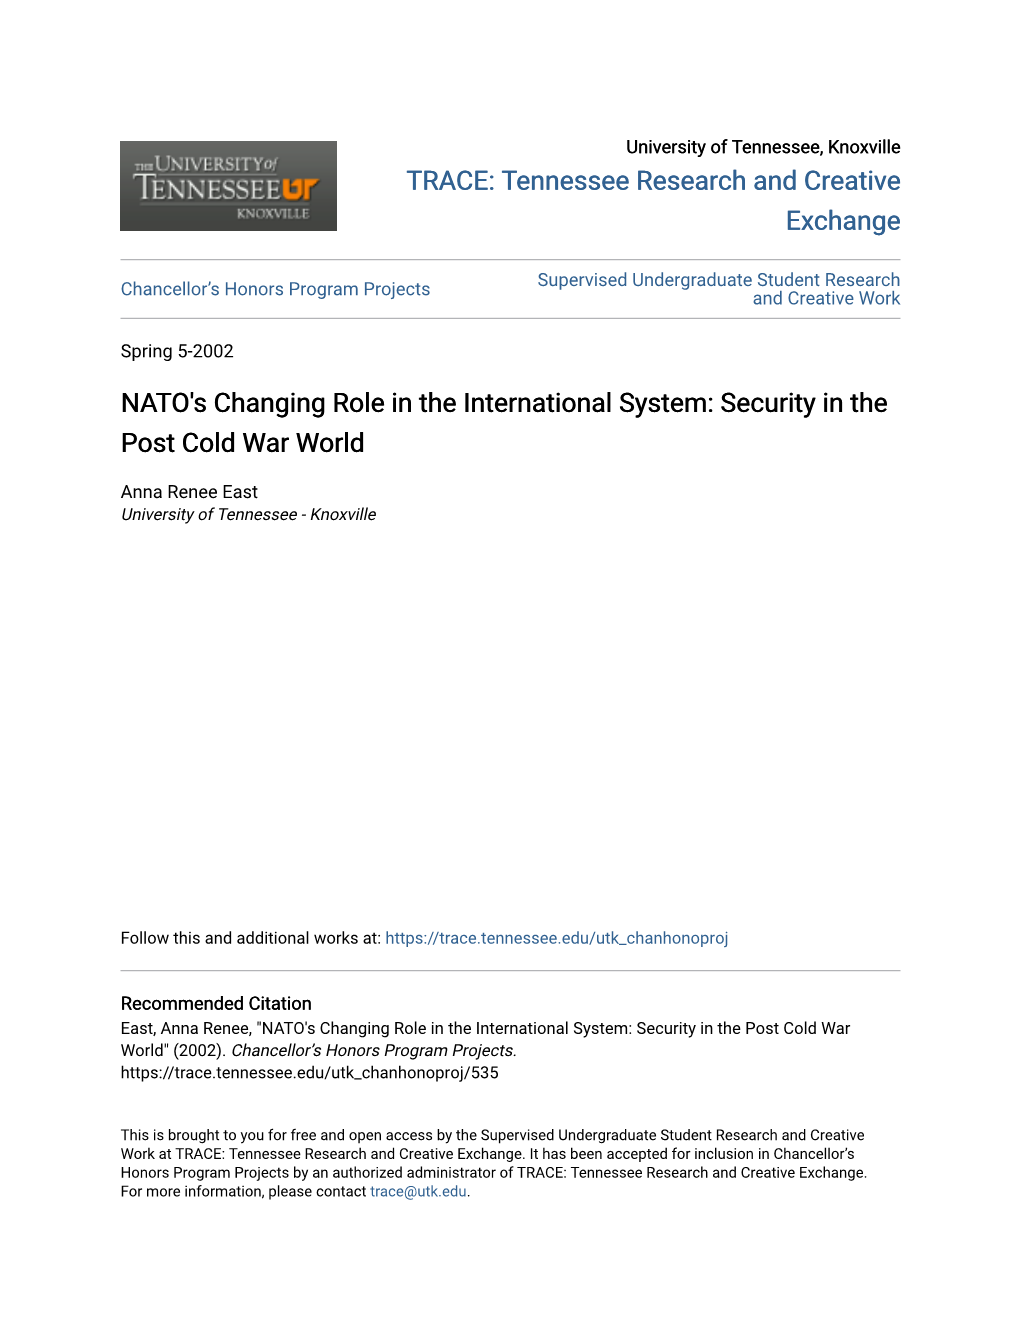 NATO's Changing Role in the International System: Security in the Post Cold War World